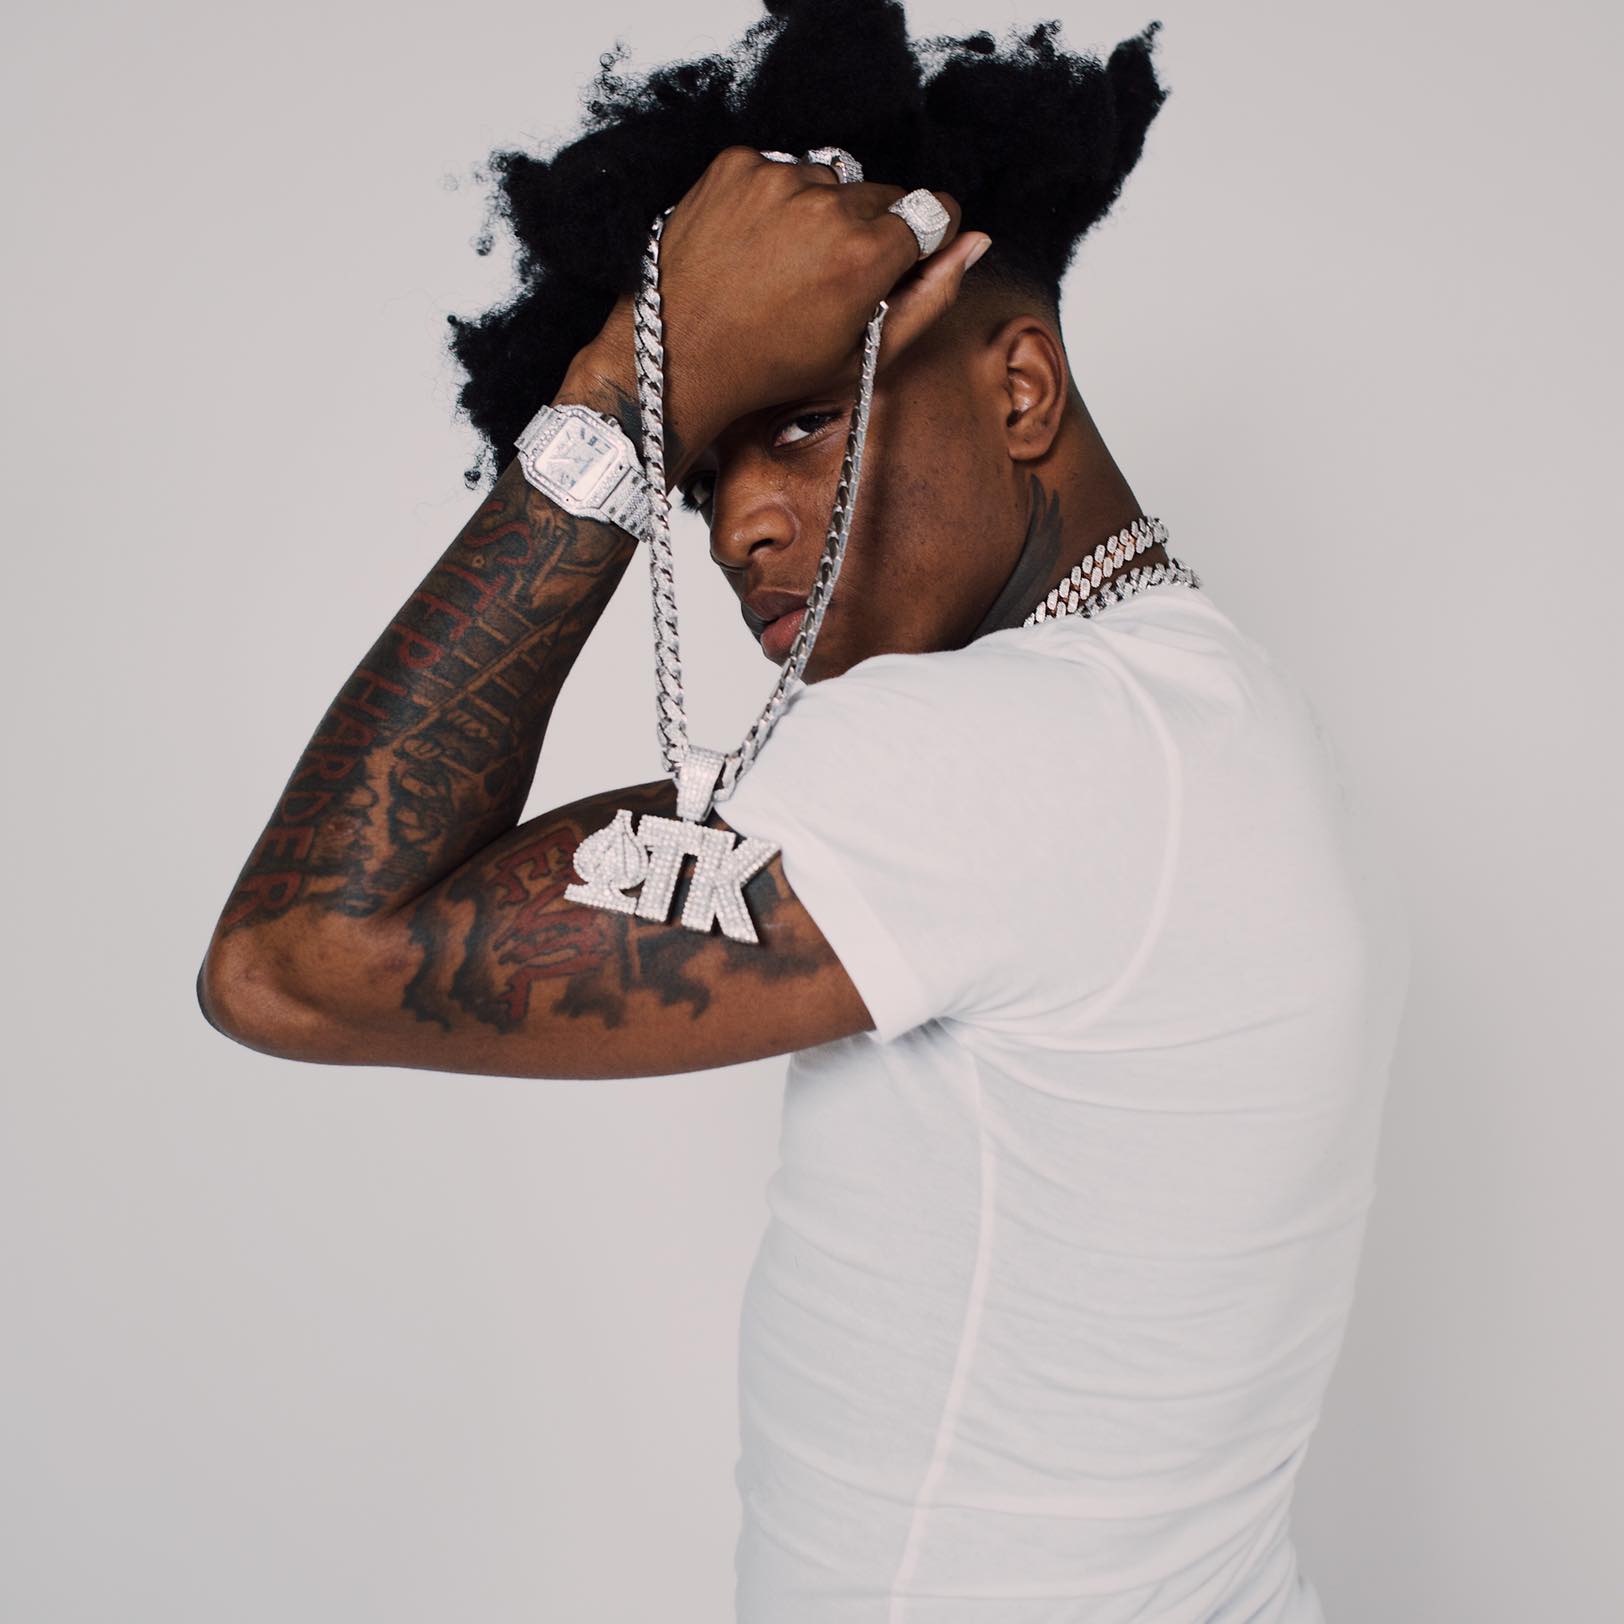 Yungeen Ace in white, holding a silver chain in front of a light background